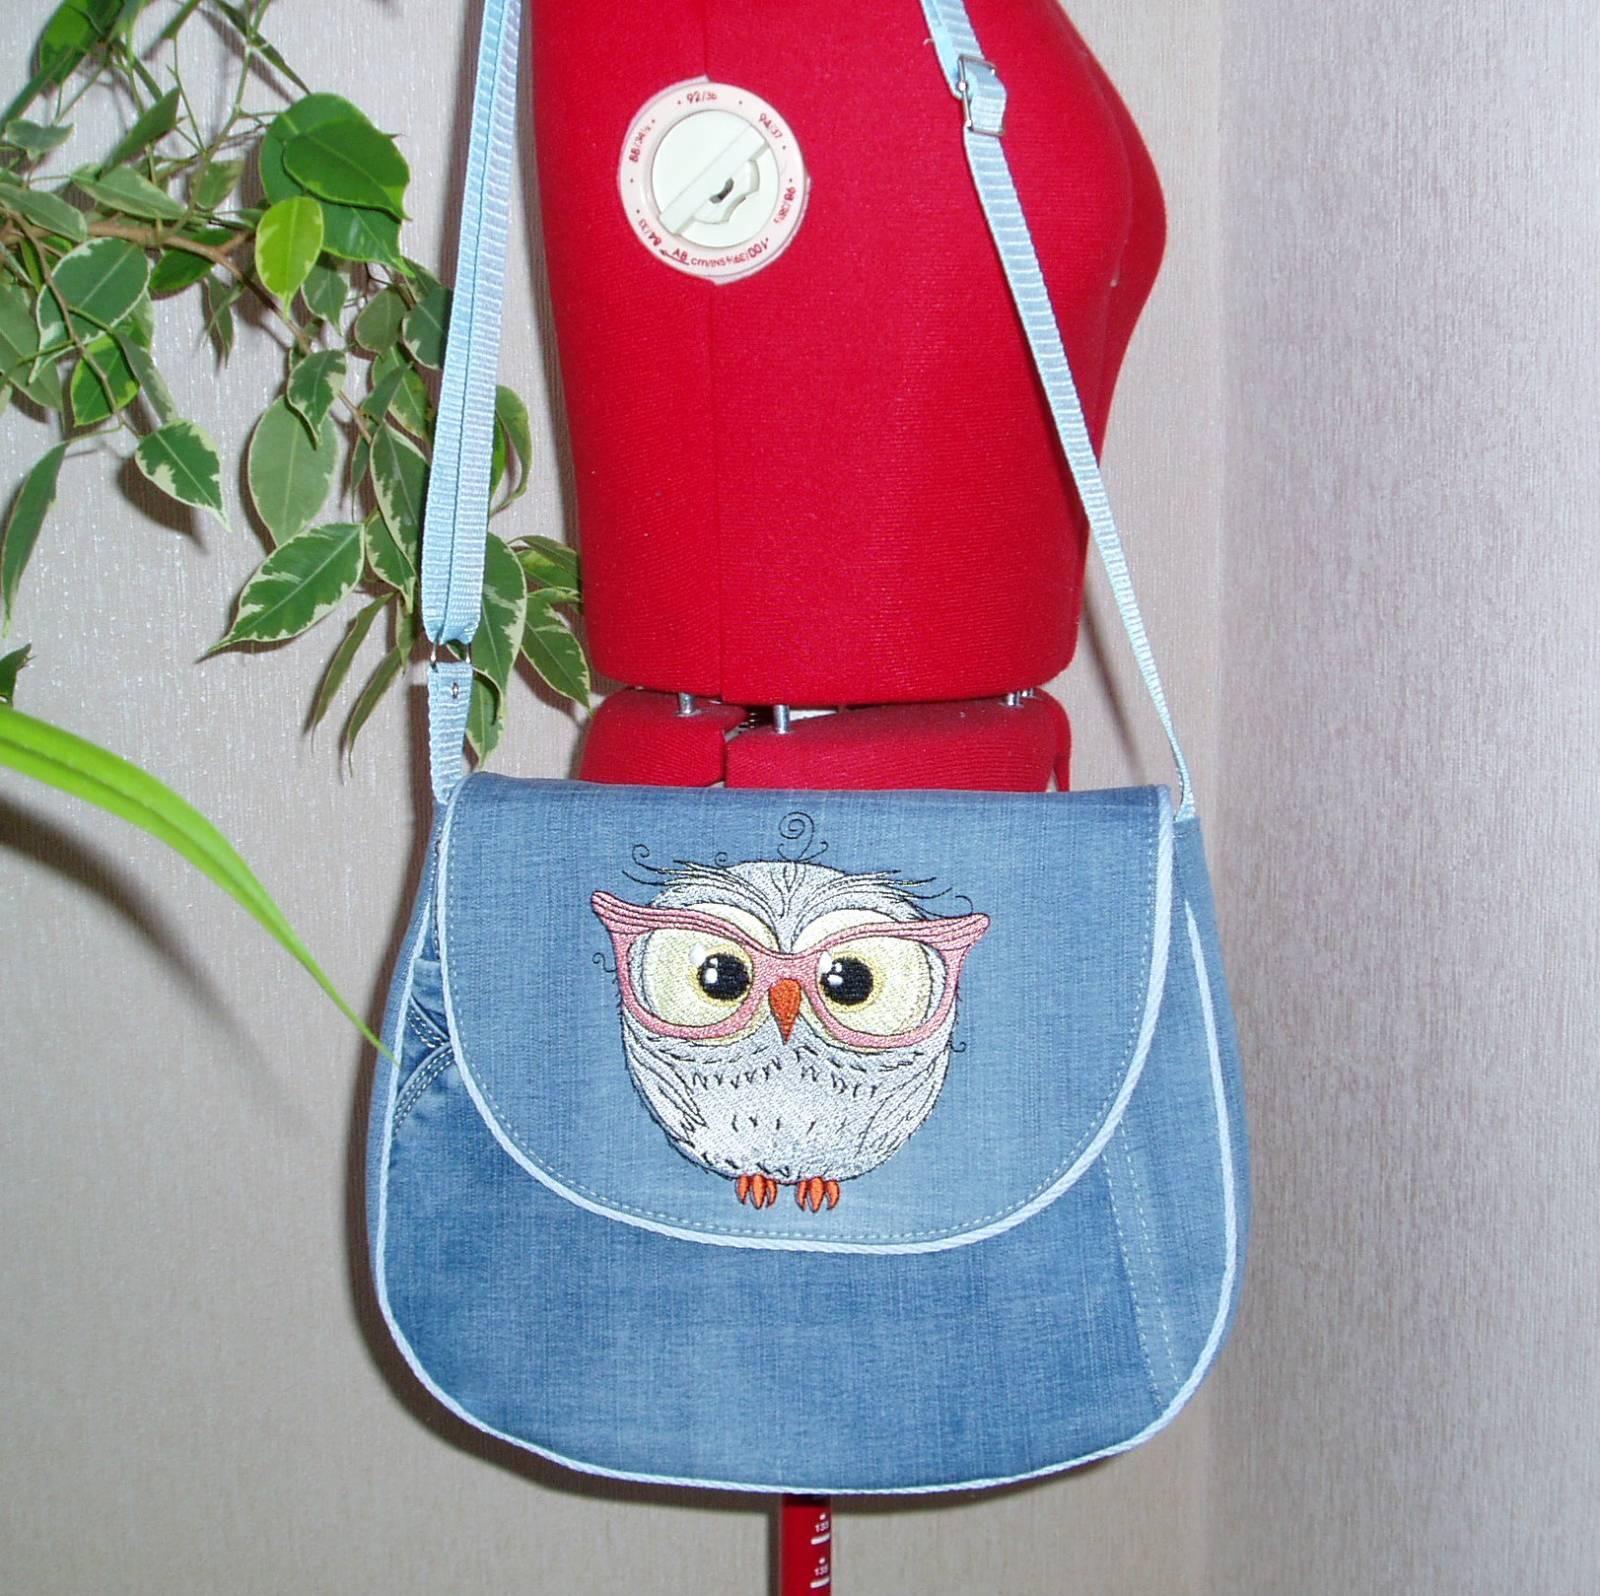 Woman's bag with Cute Owl embroidery design